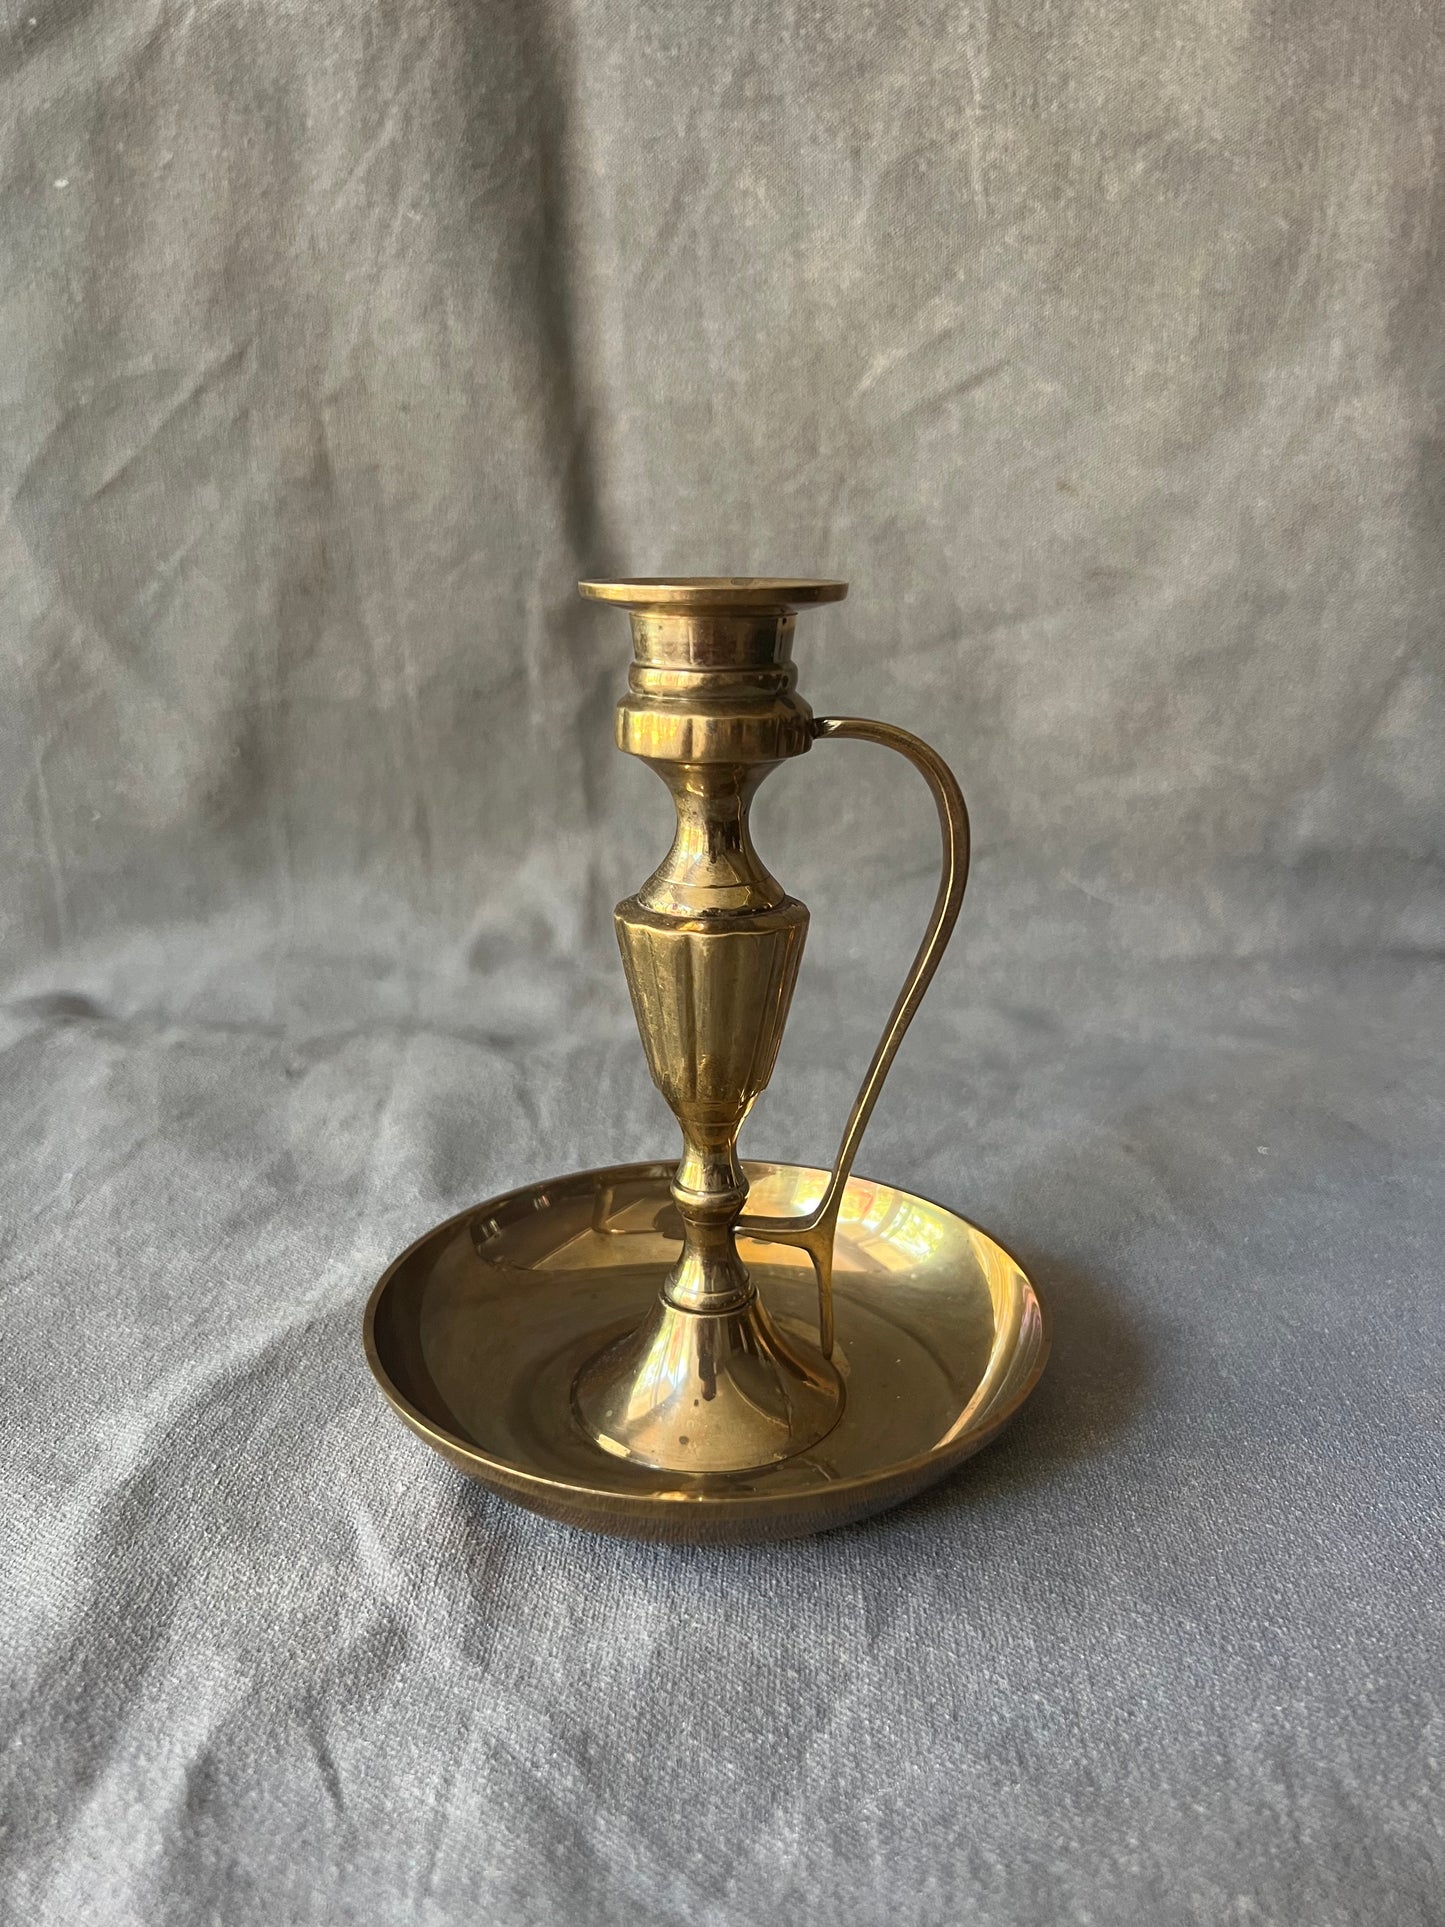 Vintage Etched Brass Taper Candlestick Holder With Finger Ring Handle Made  in India, Brass Candlestick -  Canada